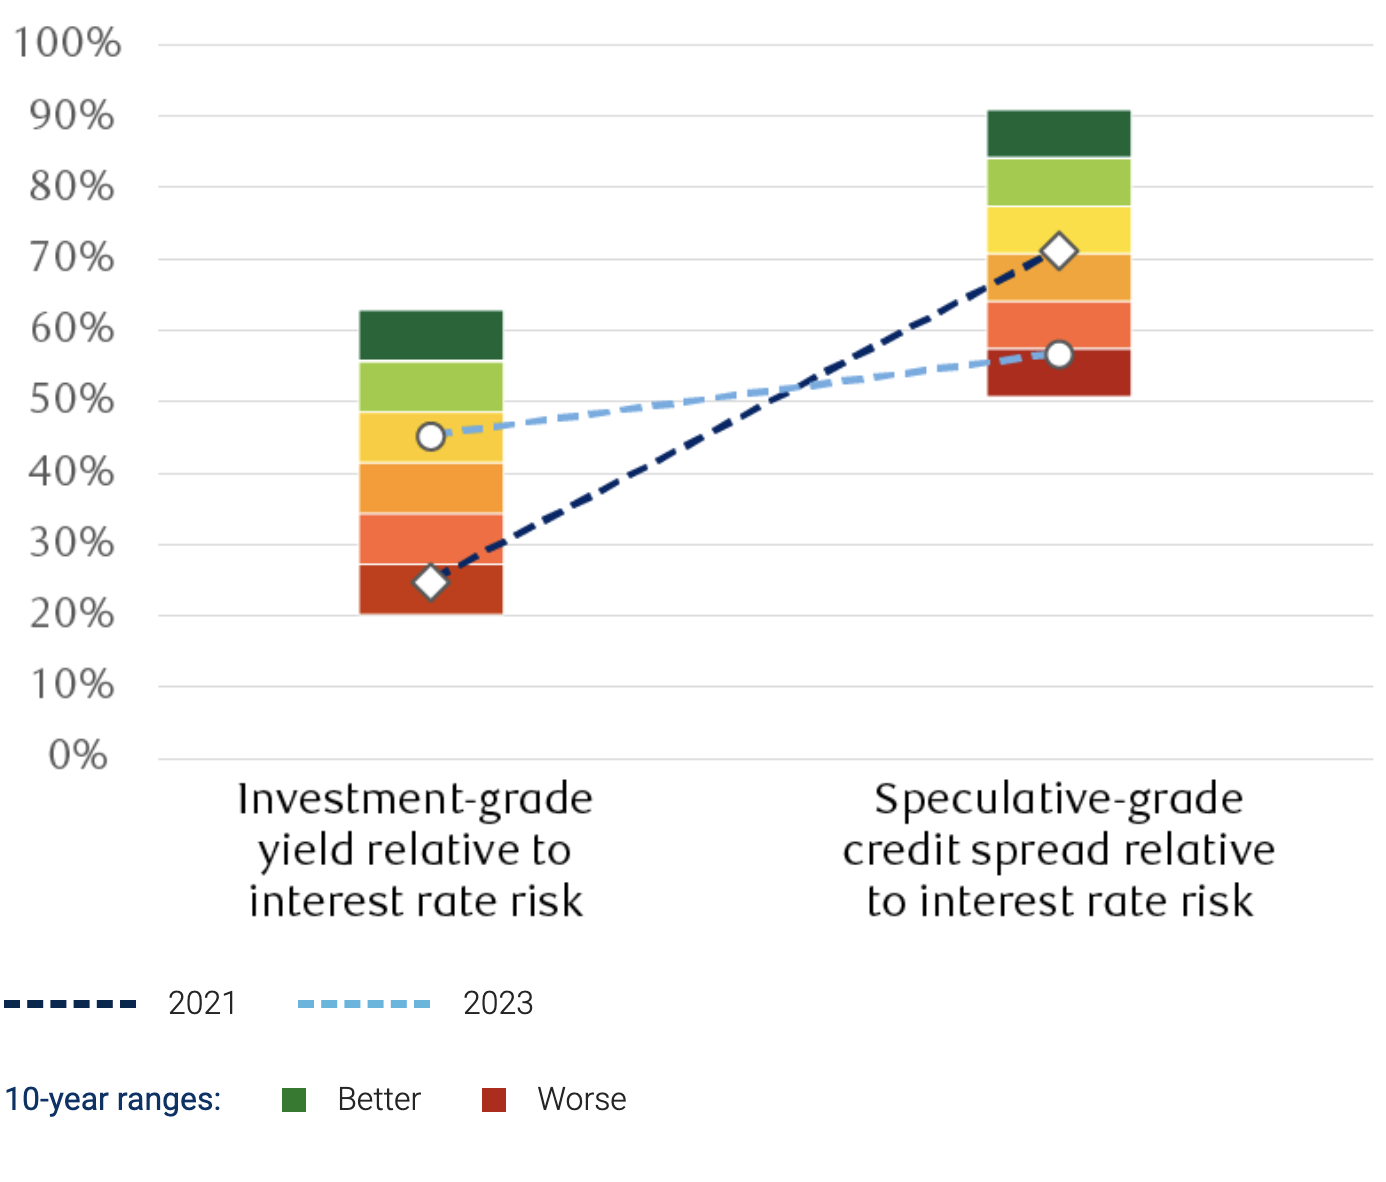 The chart shows how we view valuations in the credit markets, where investment-grade corporate yields are too low relative to the interest rate risk, and speculative-grade yields offer average yield compensation for credit risk. But we expect that balance to shift in favor of investment-grade bonds in years ahead.